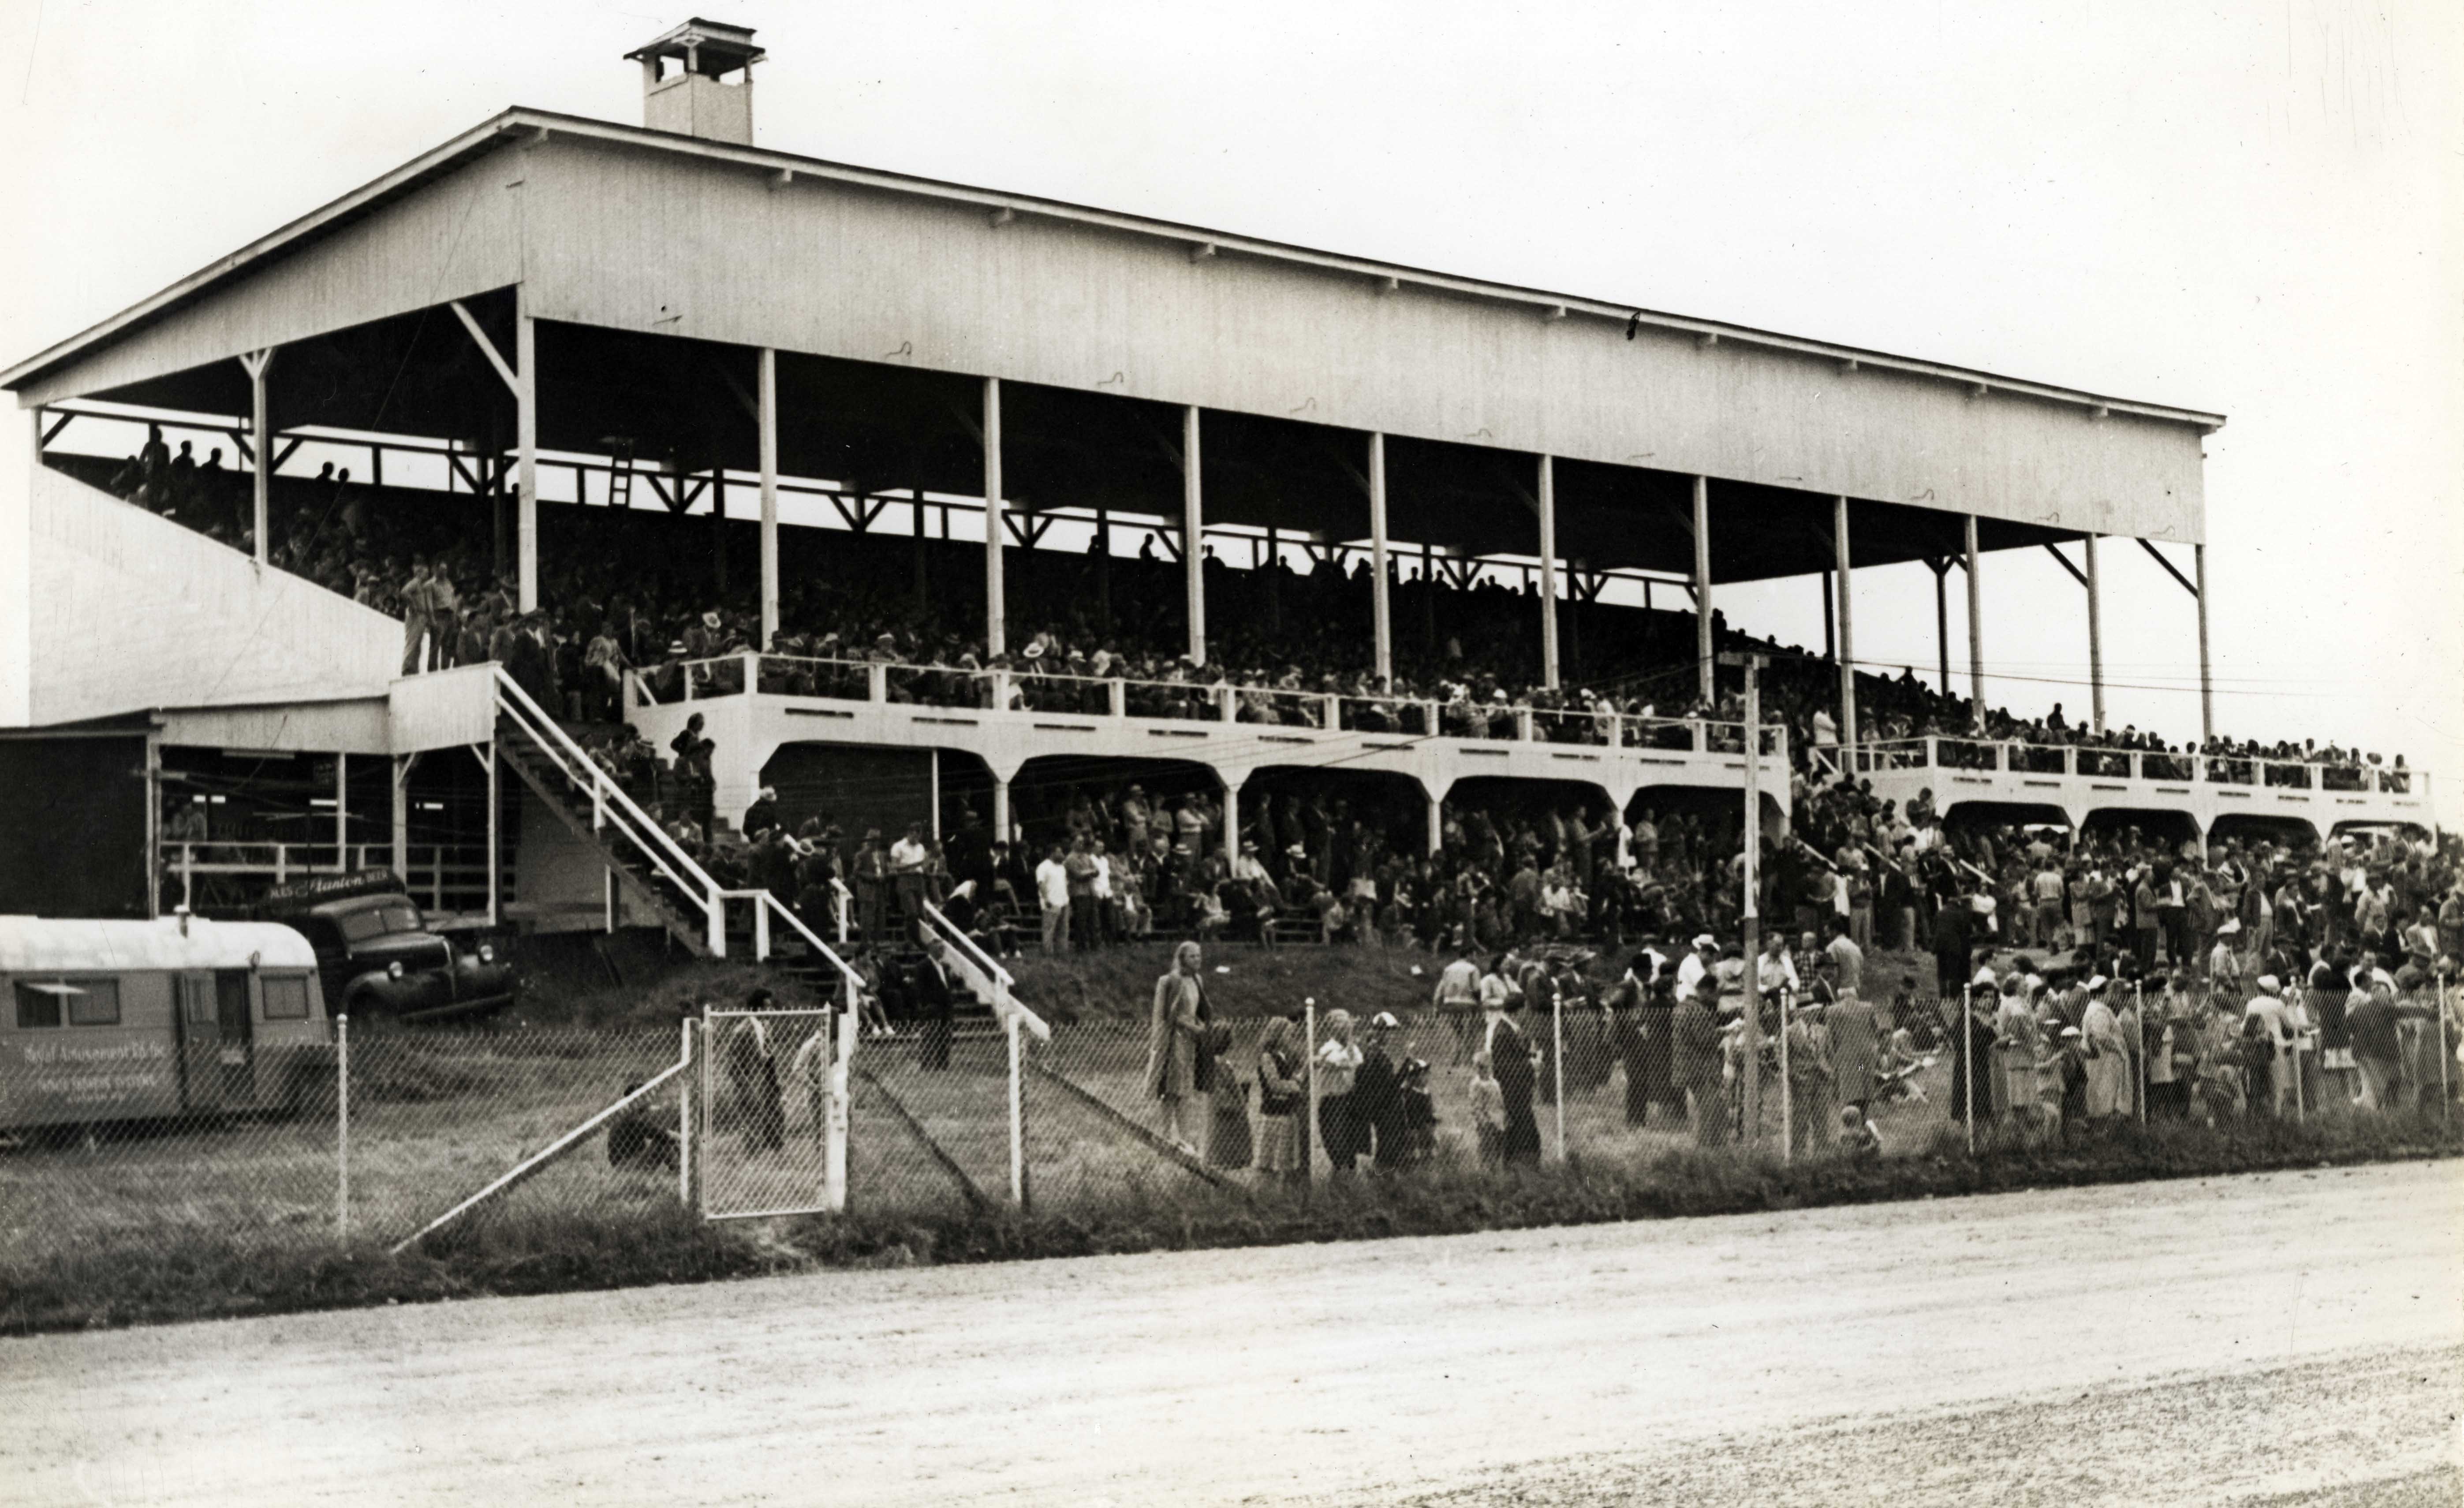 Horsemen of the Grand Circuit Competing in Old Orchard Beach, Maine at the Kite Track (At some point during the war years)